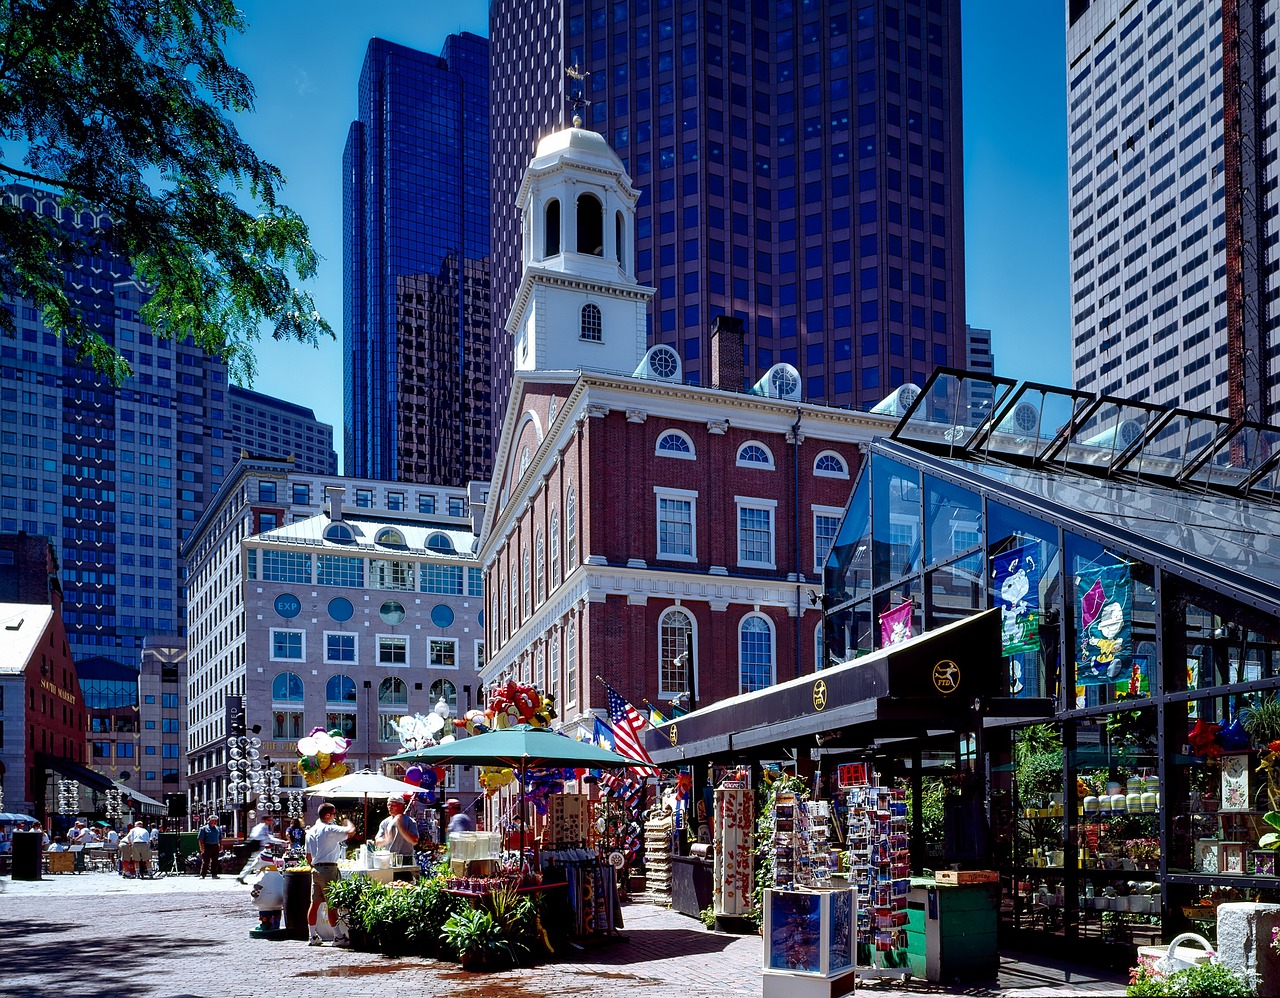 Historical Boston: Freedom Trail and Local Cuisine